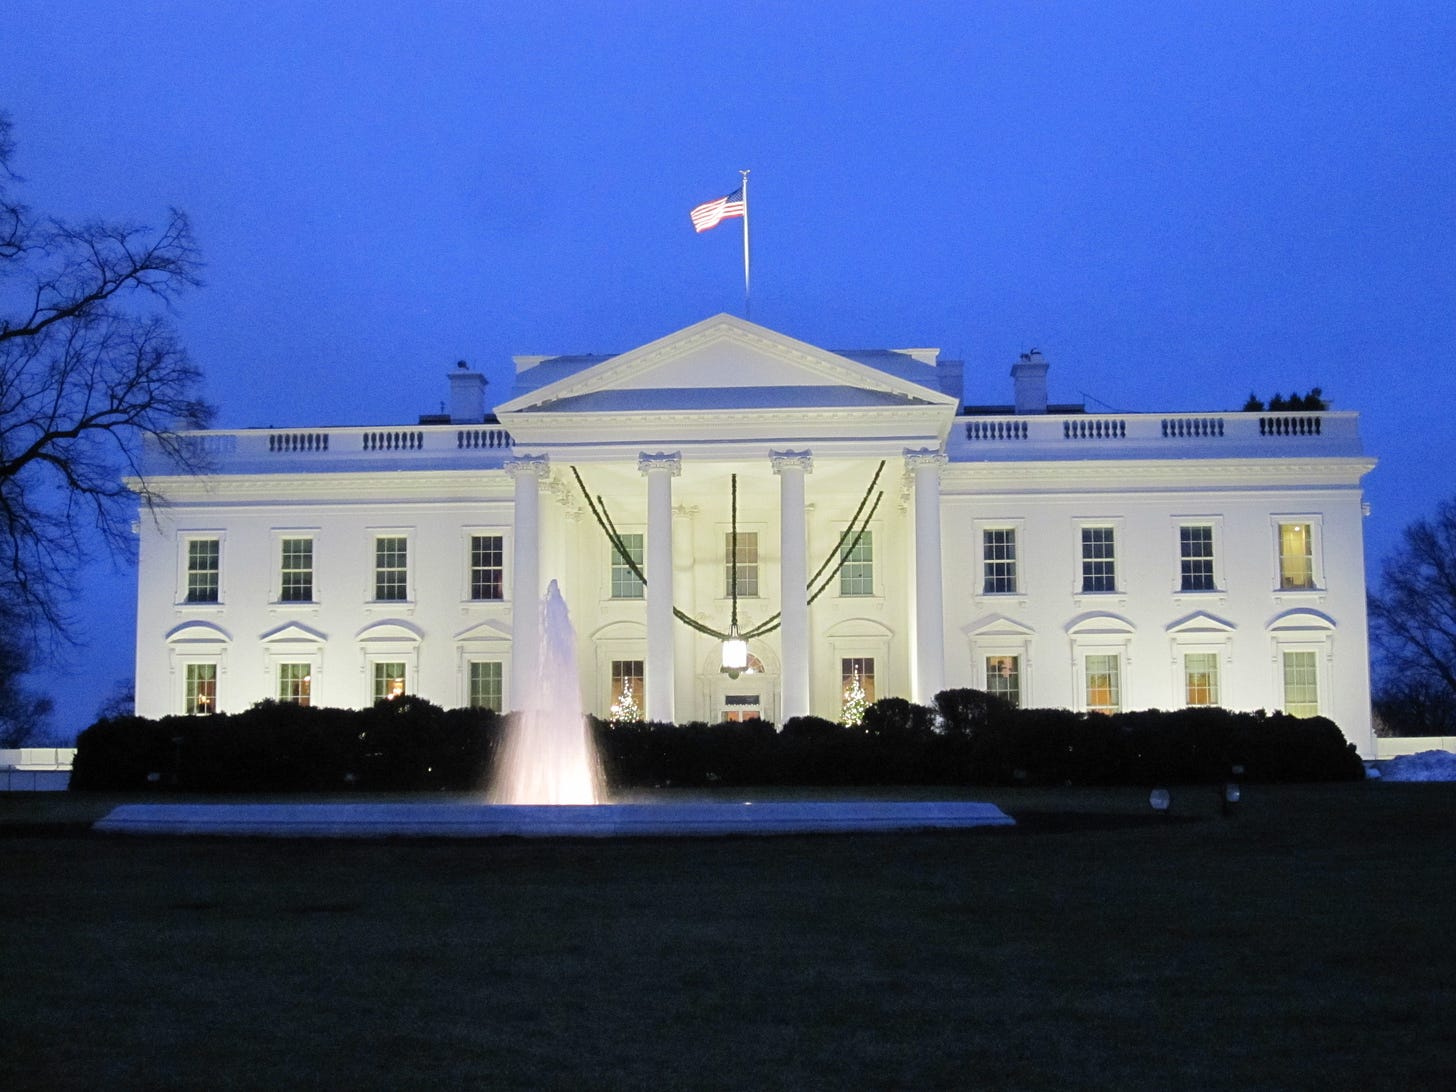 White House: CC-licensed photo by Tom Lohdan on Flickr at http://flic.kr/p/7qGBY5